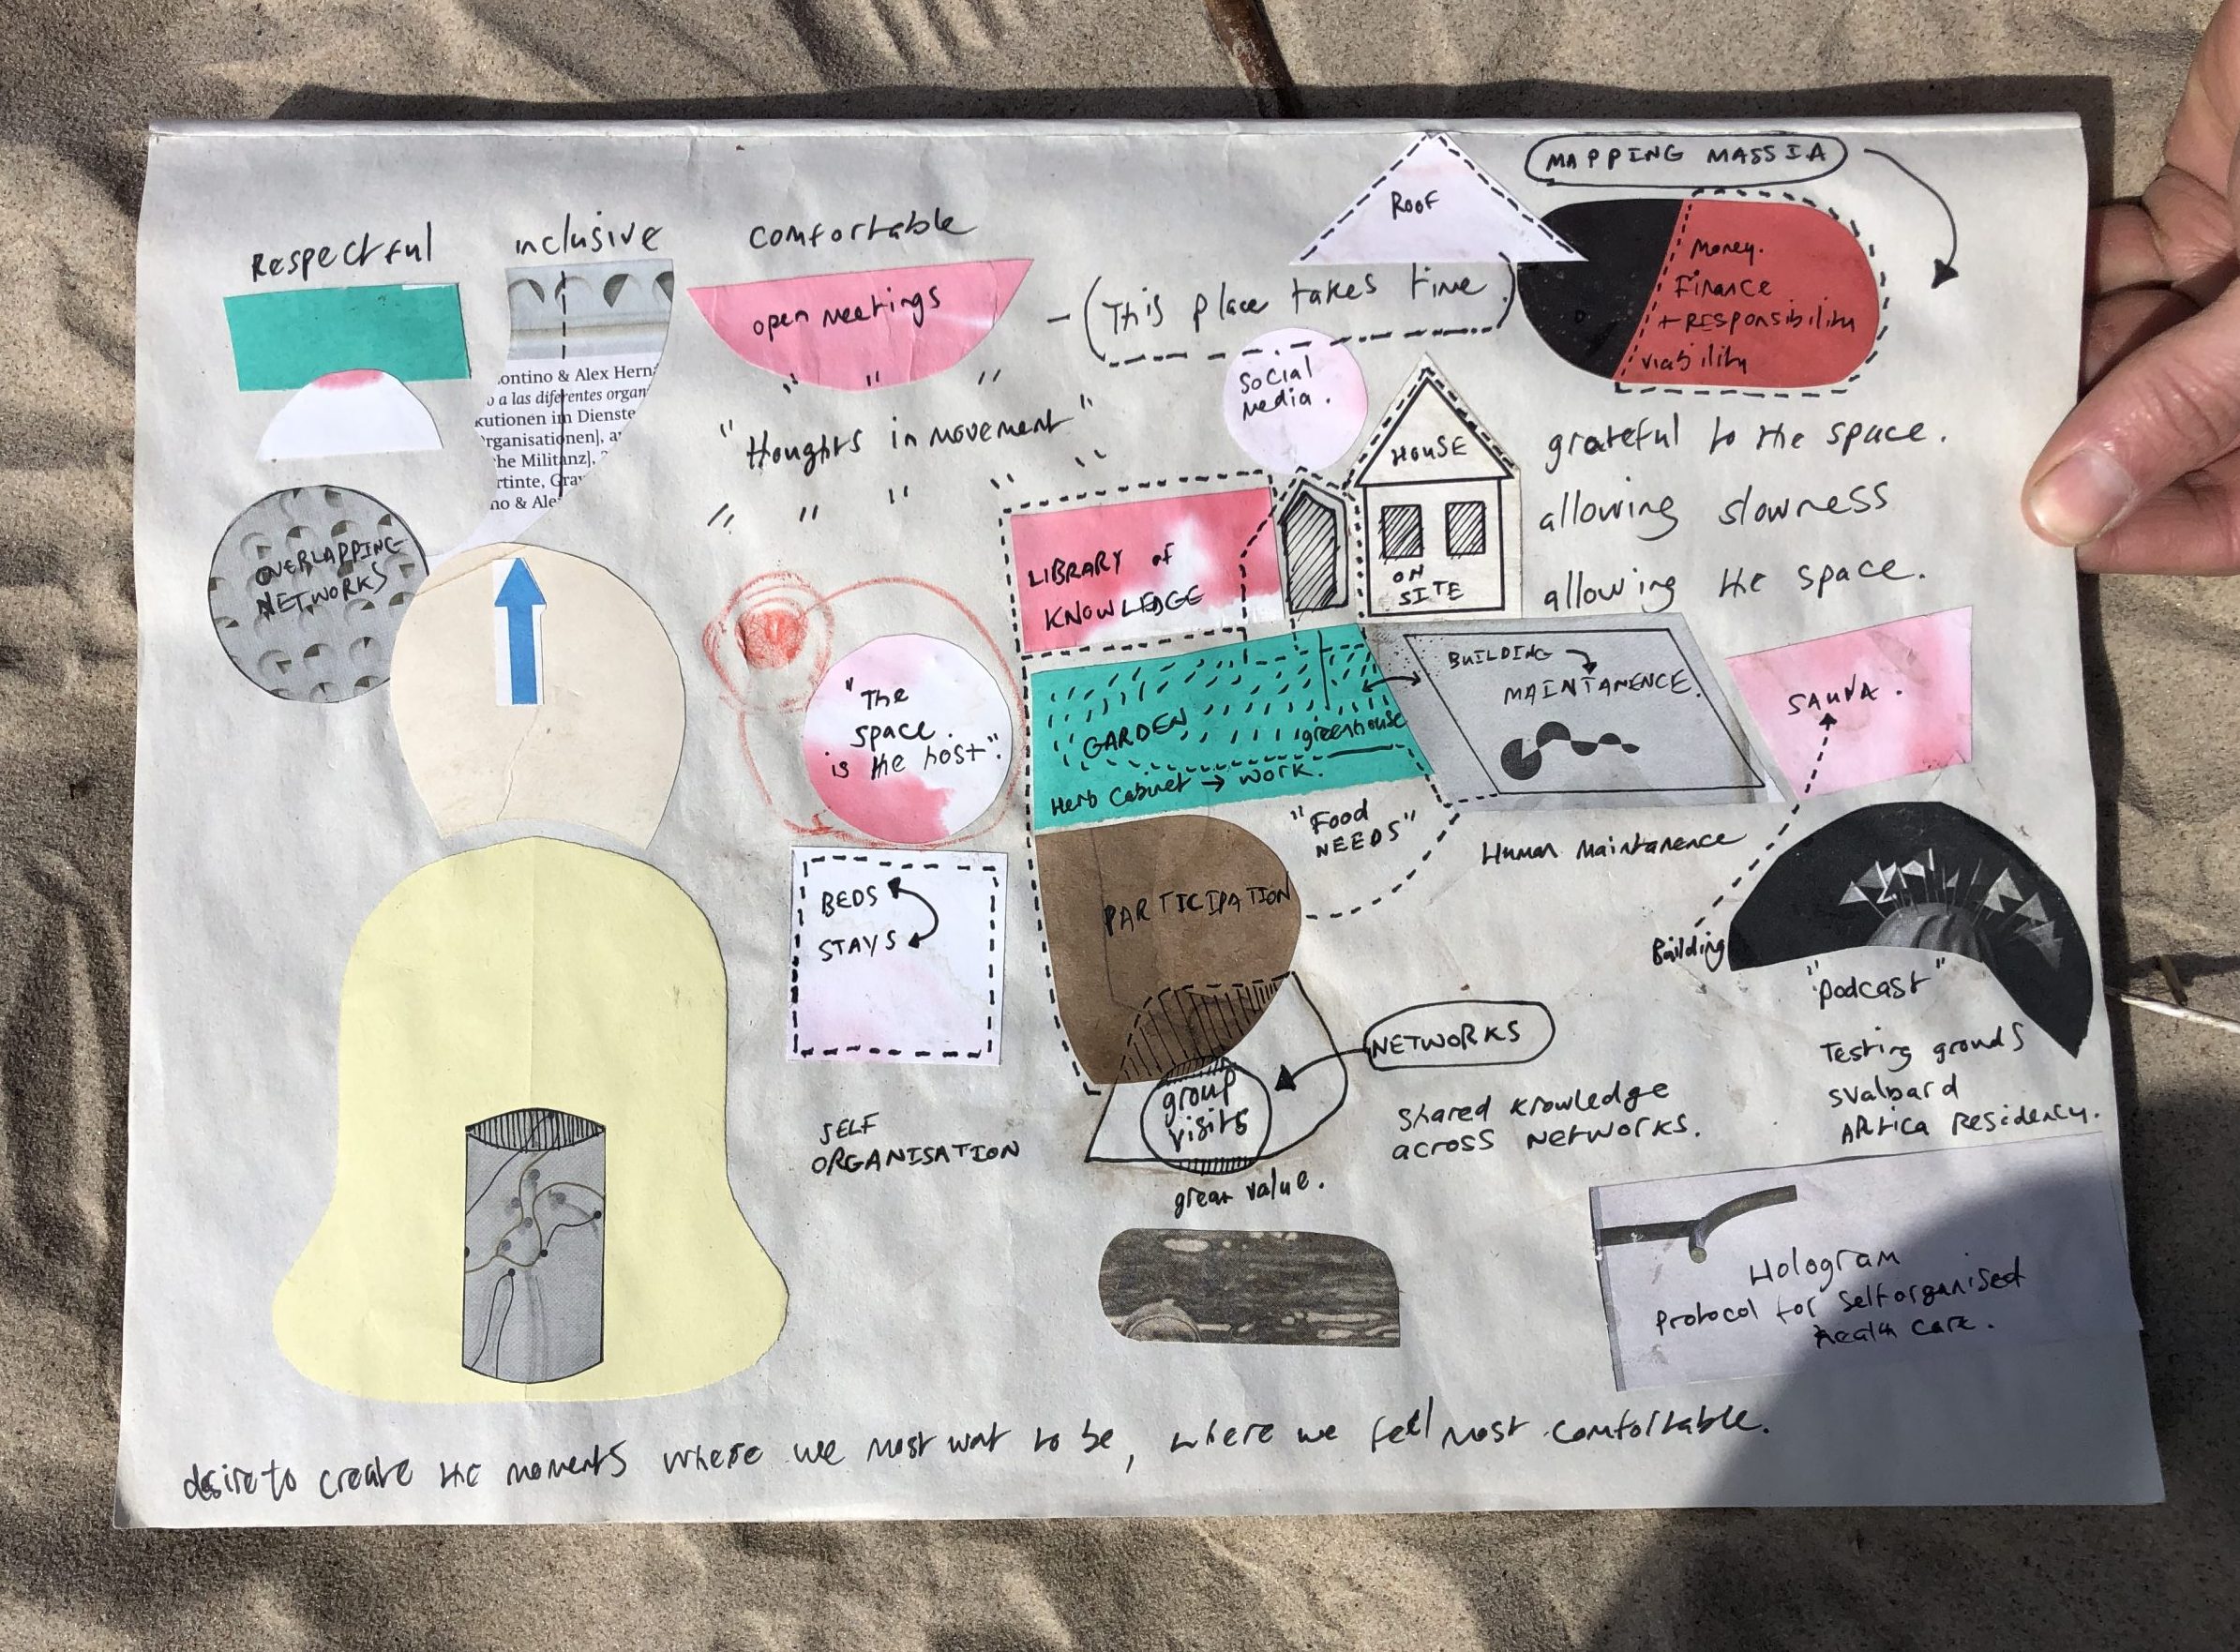 A collage of handwritten text, illustrations, shapes, colors on paper held by a hand above a sandy beach ground, showing a mind map from MASSIA's Spring Assembly in 2023